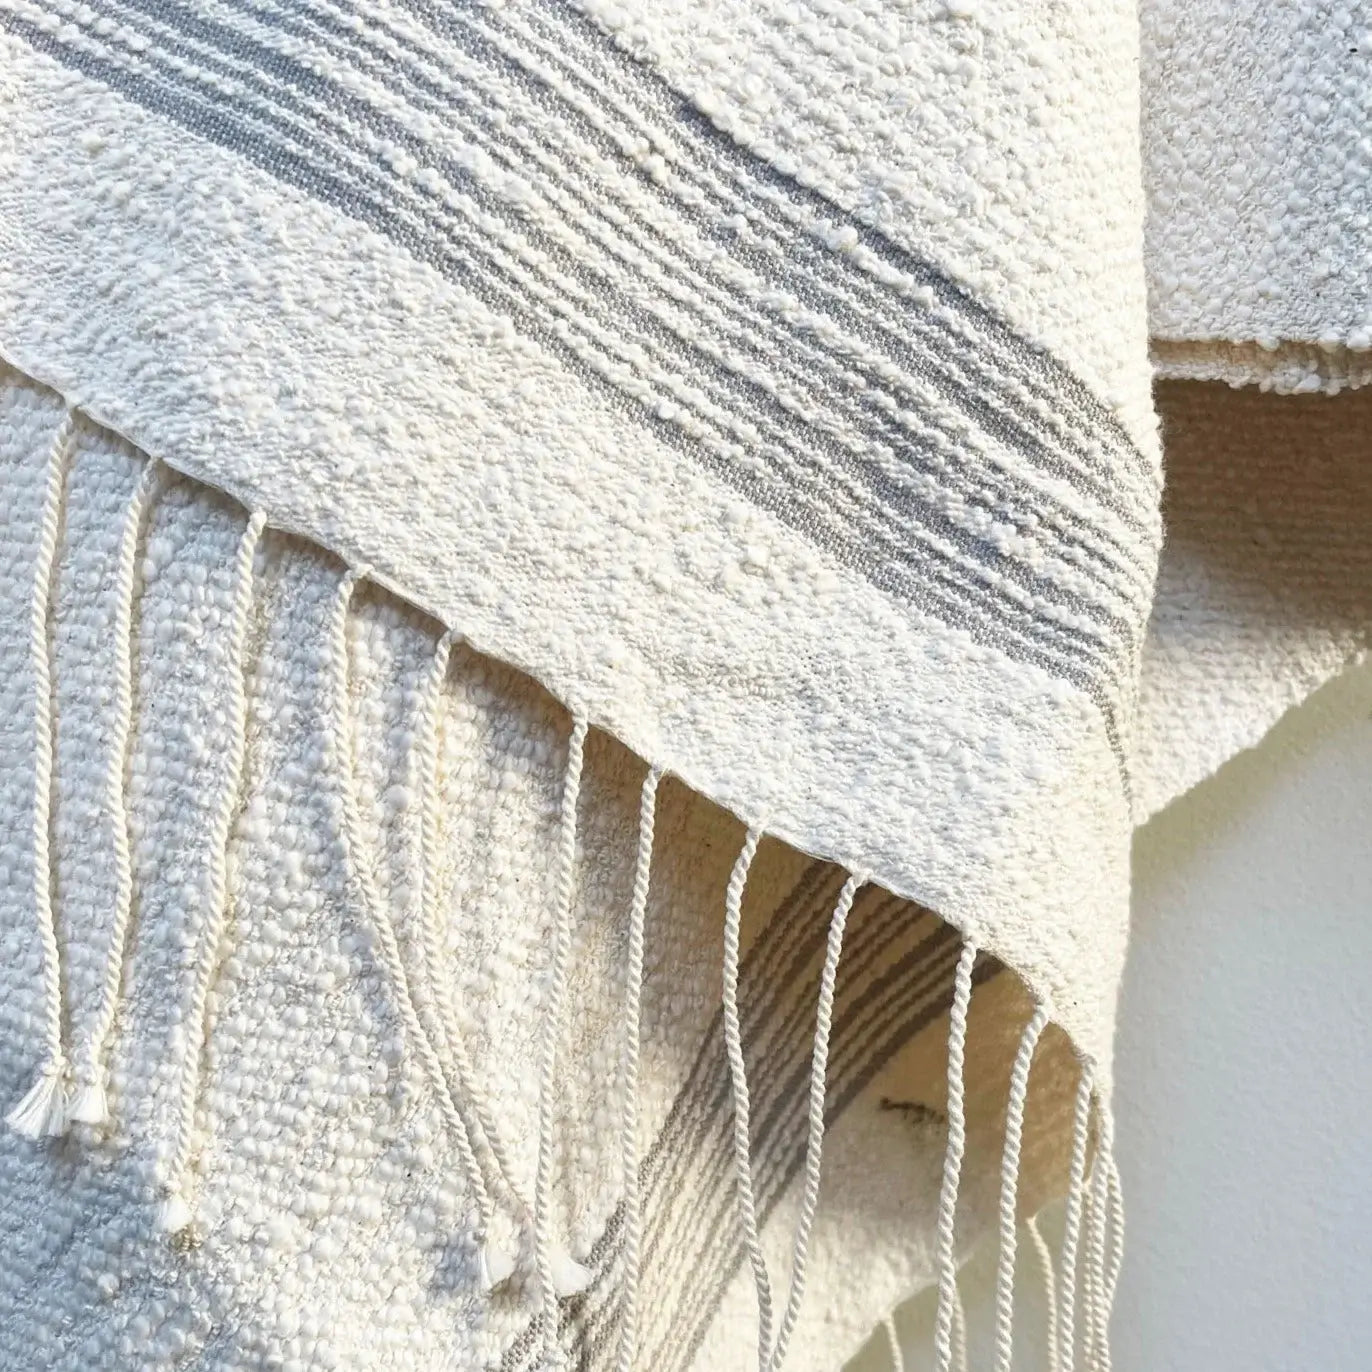 Dounia home bath/beach towel in Stone / ivory made of Cotton, Model: Salma, Close Up View